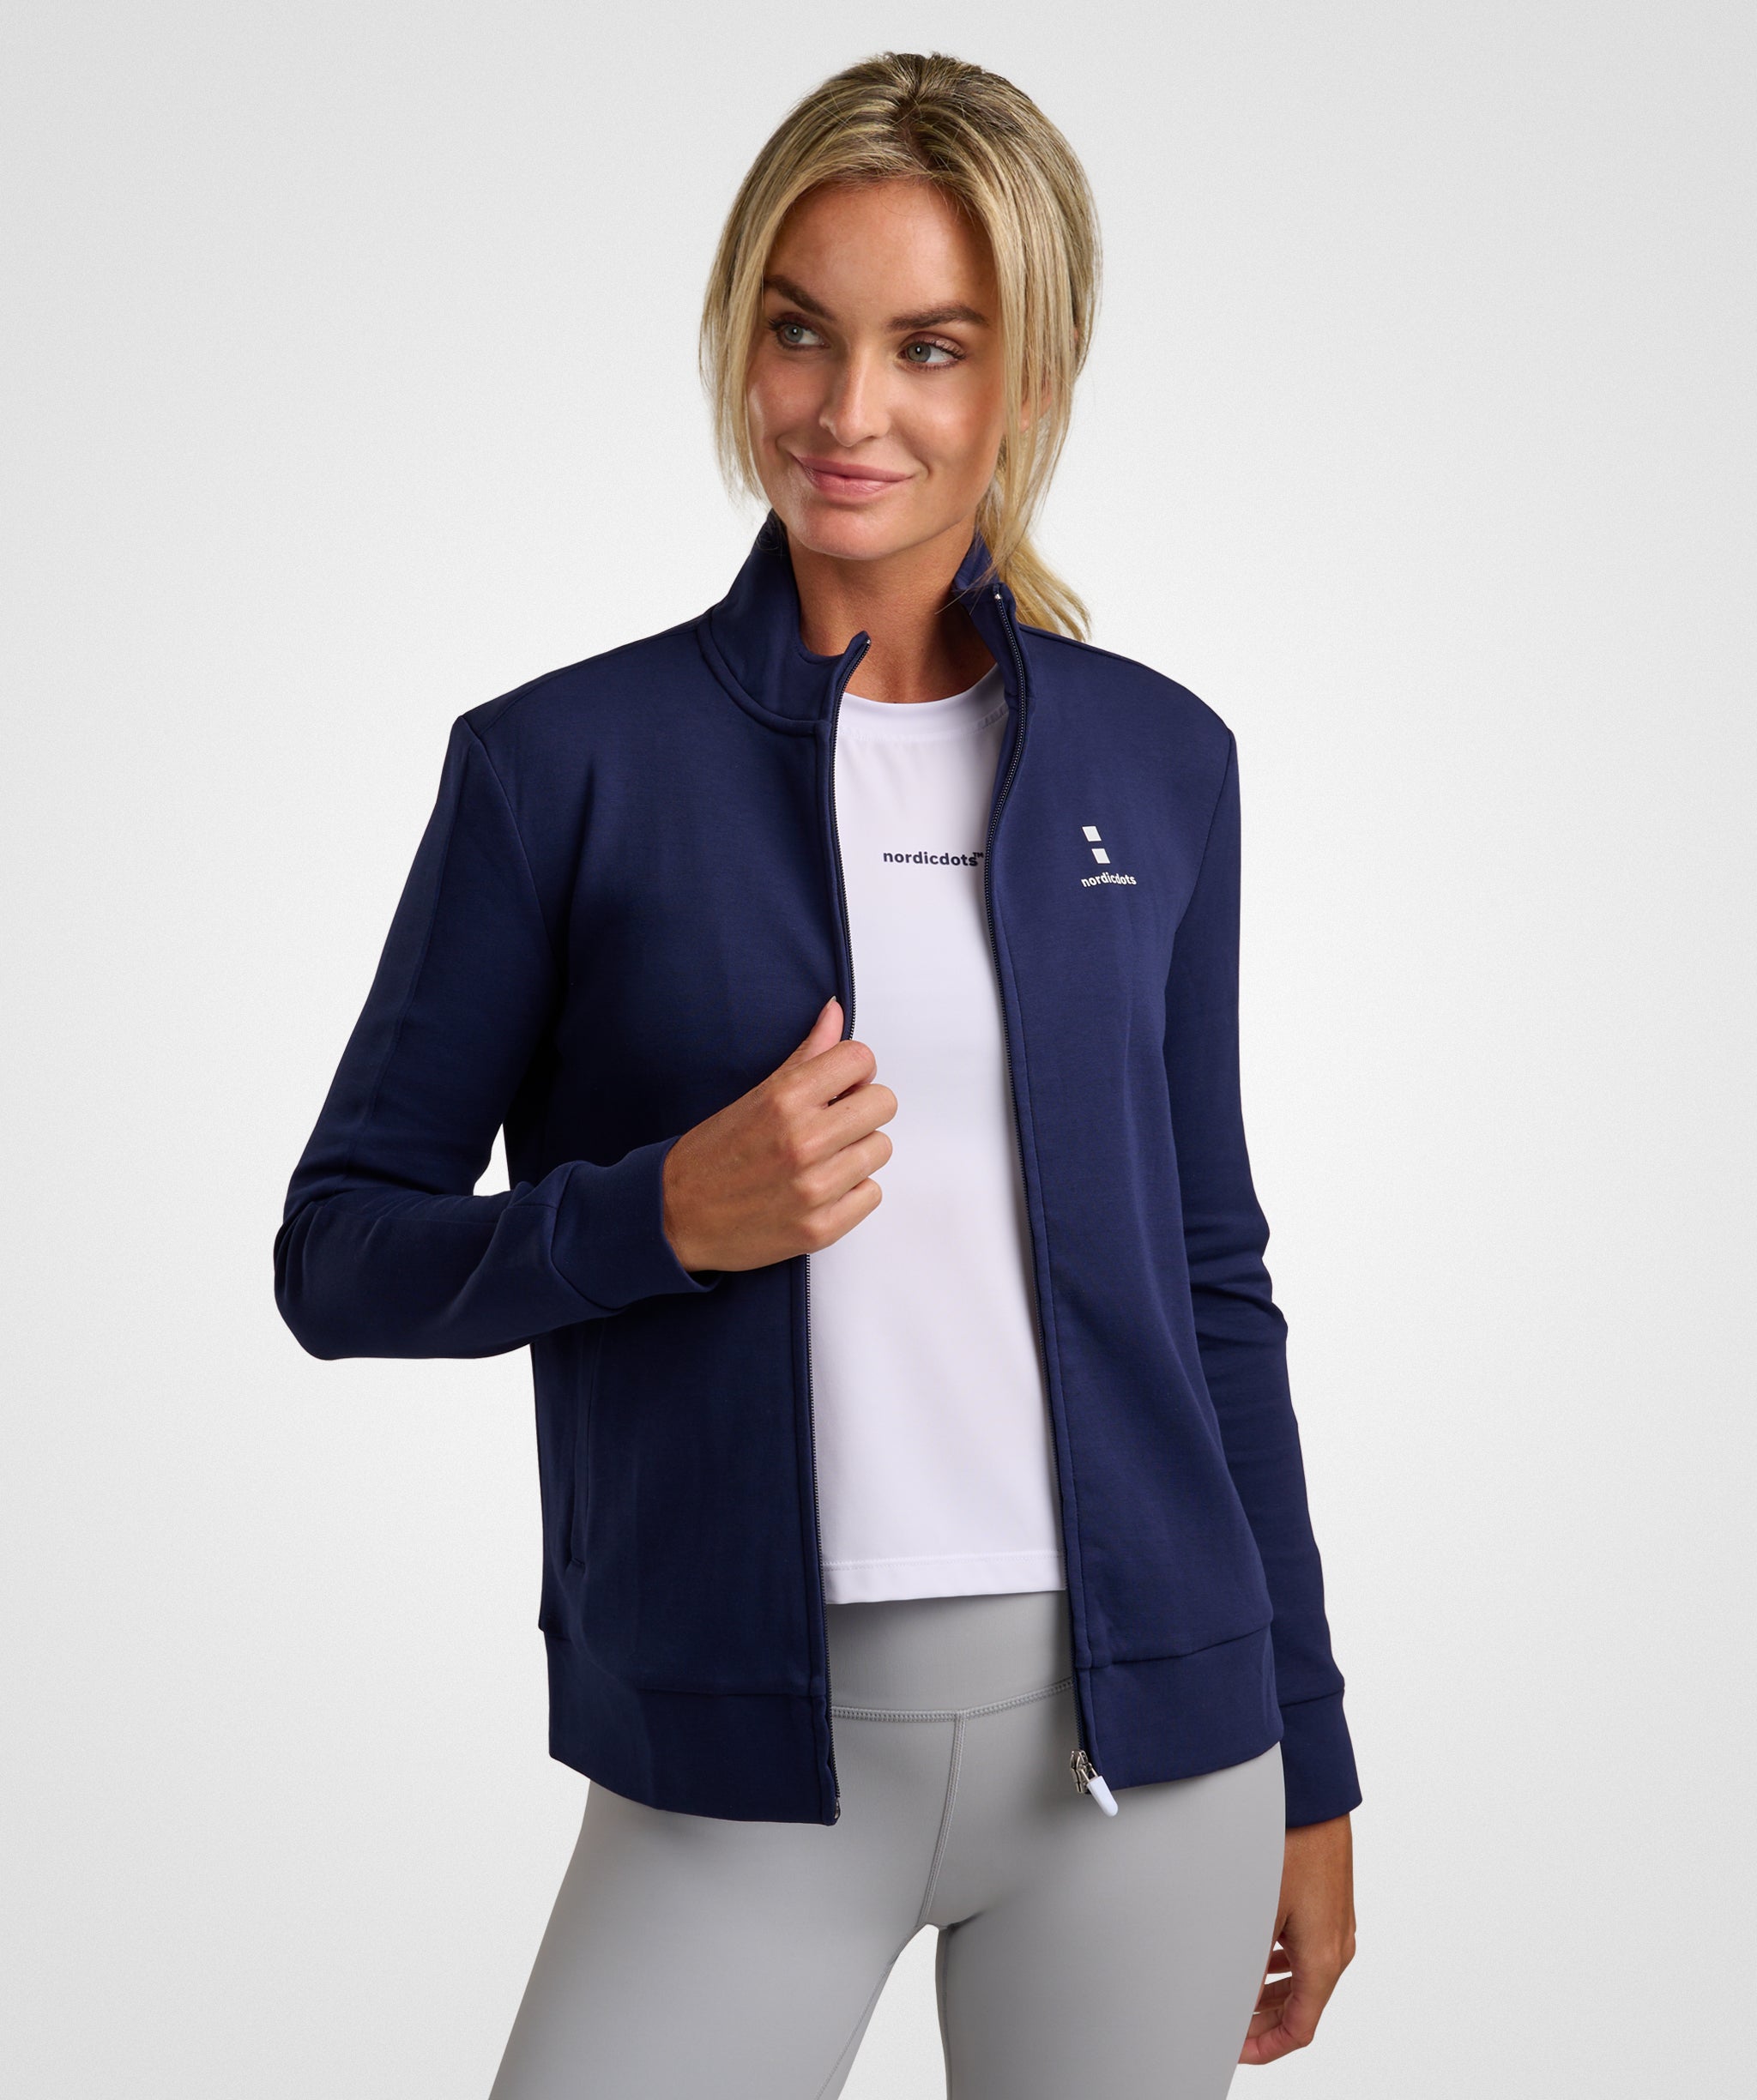 nordicdots women's navy jacket tennis padel fitness everyday outfit nordicdots.com